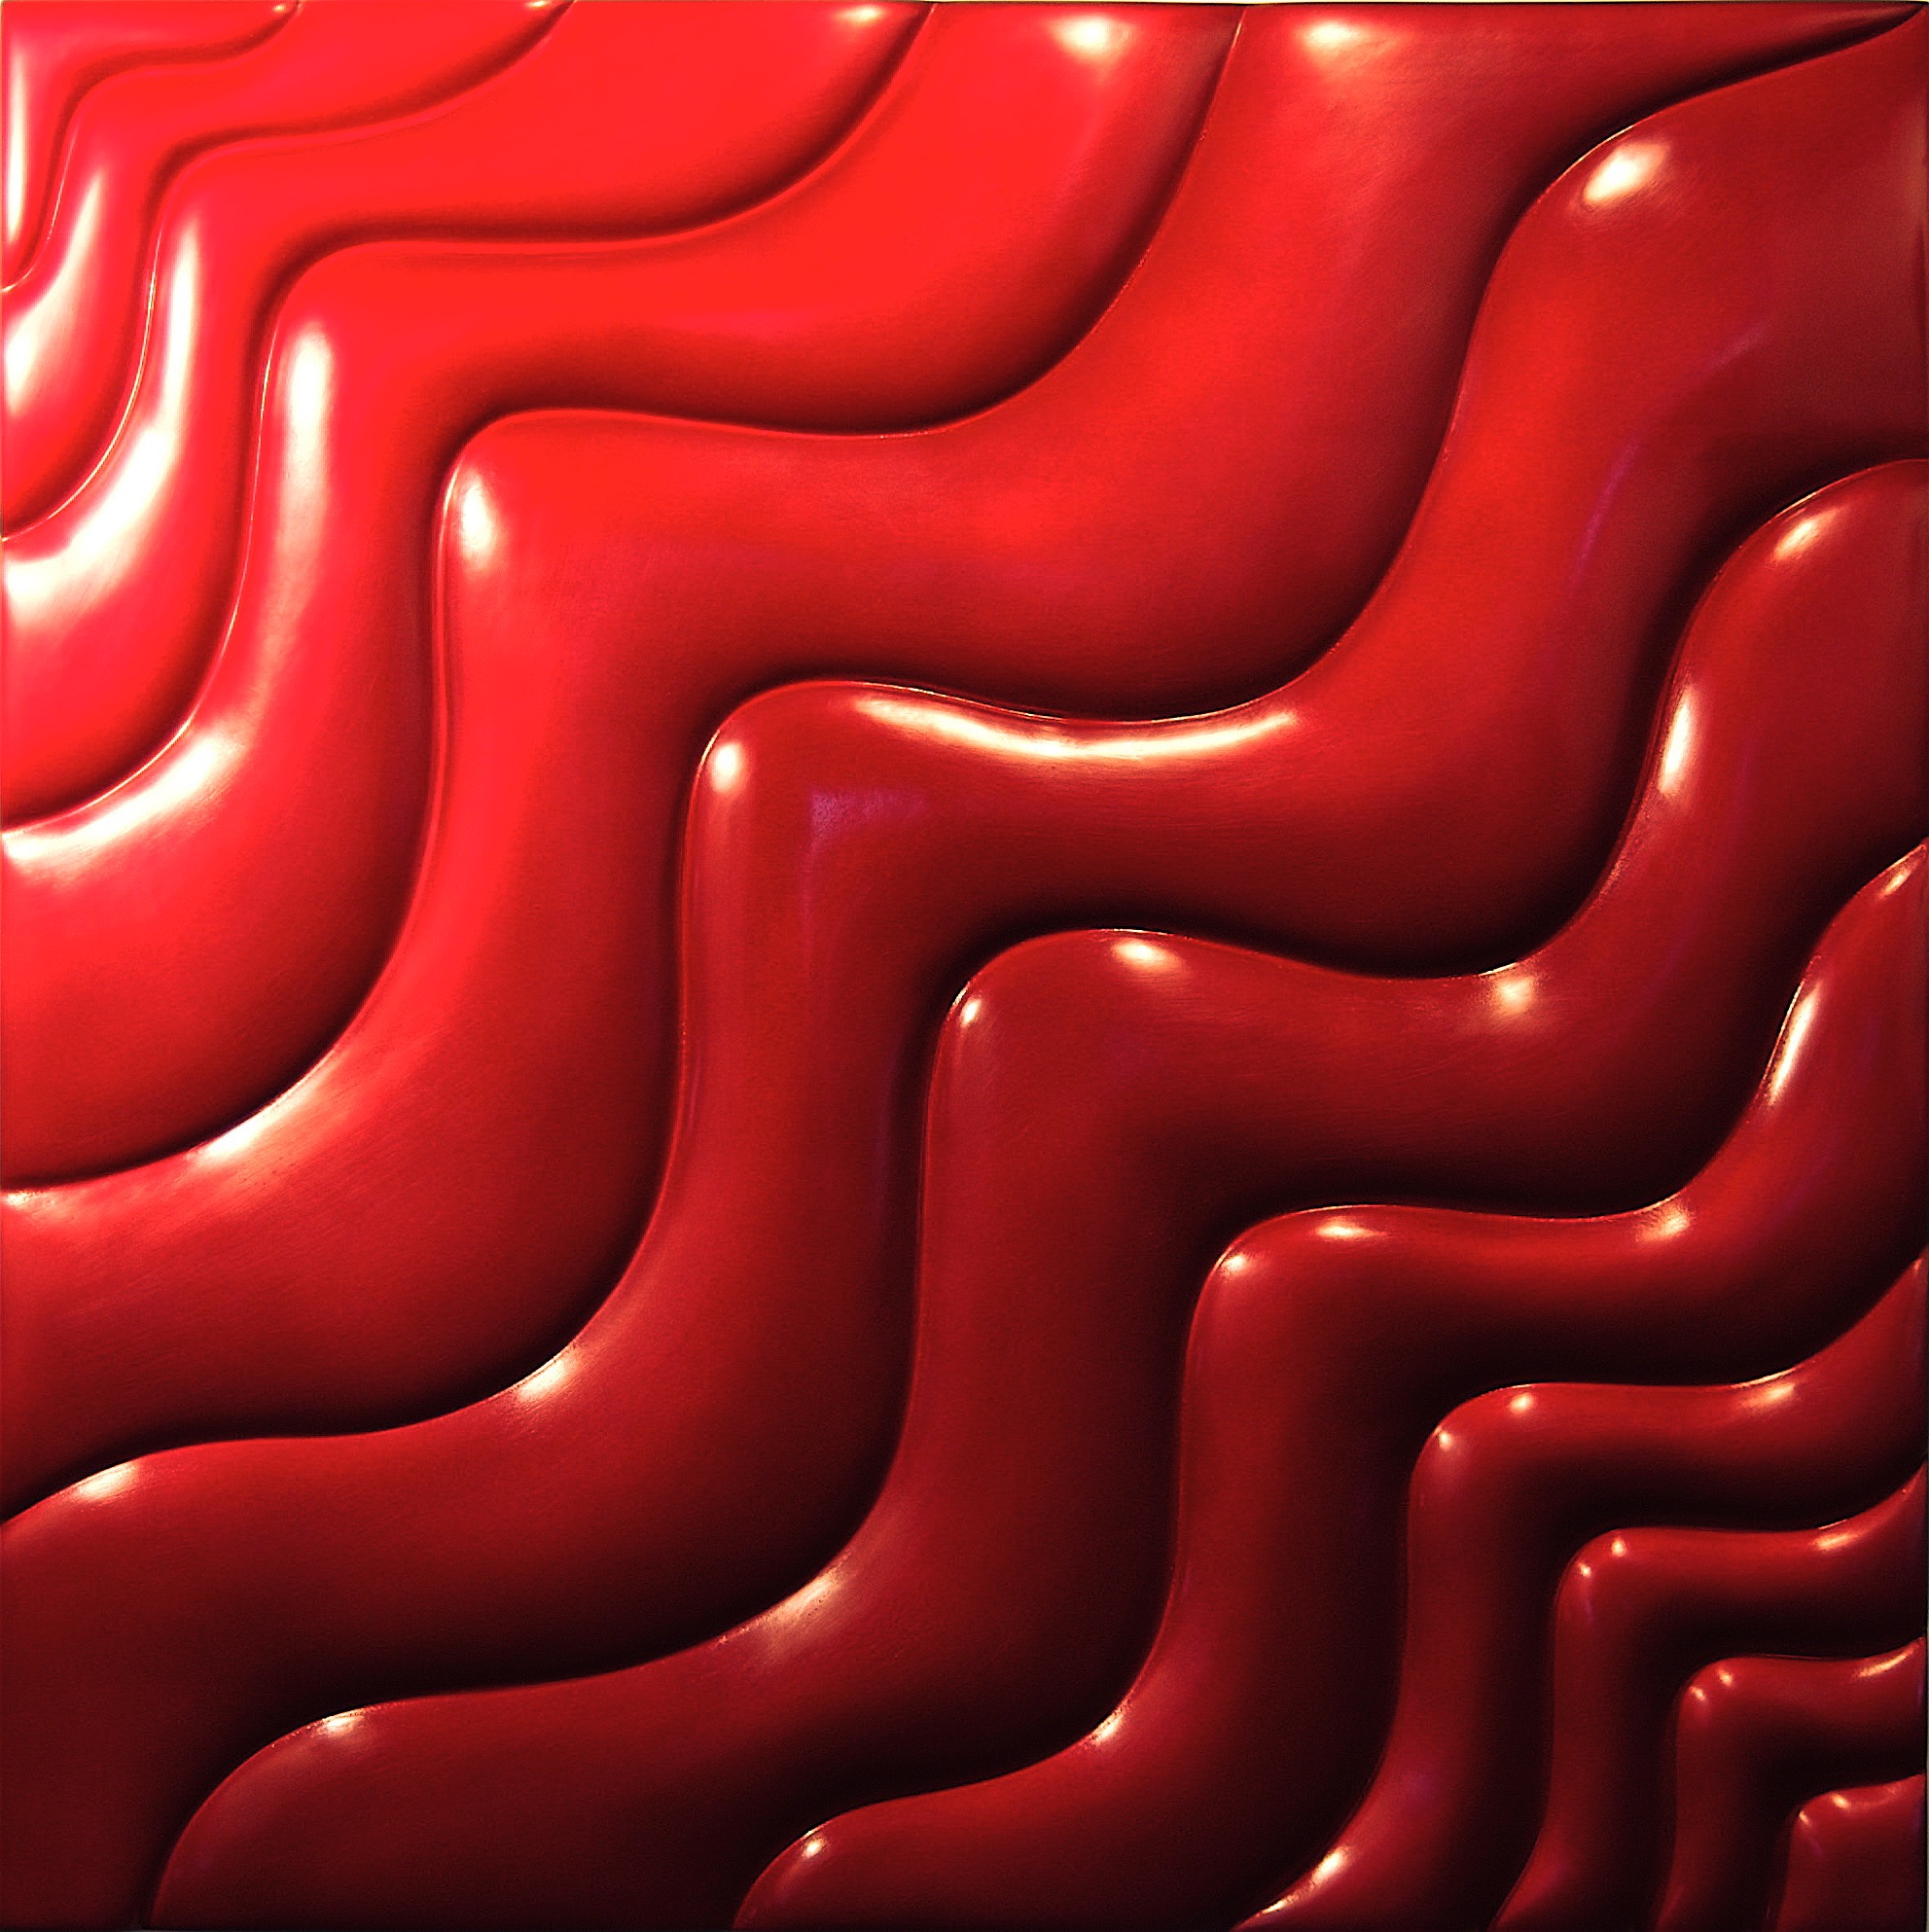 Thomas Coffin - Wave Effect (red), 36"h x 36"w x 2"d, mixed media sculptural wall relief